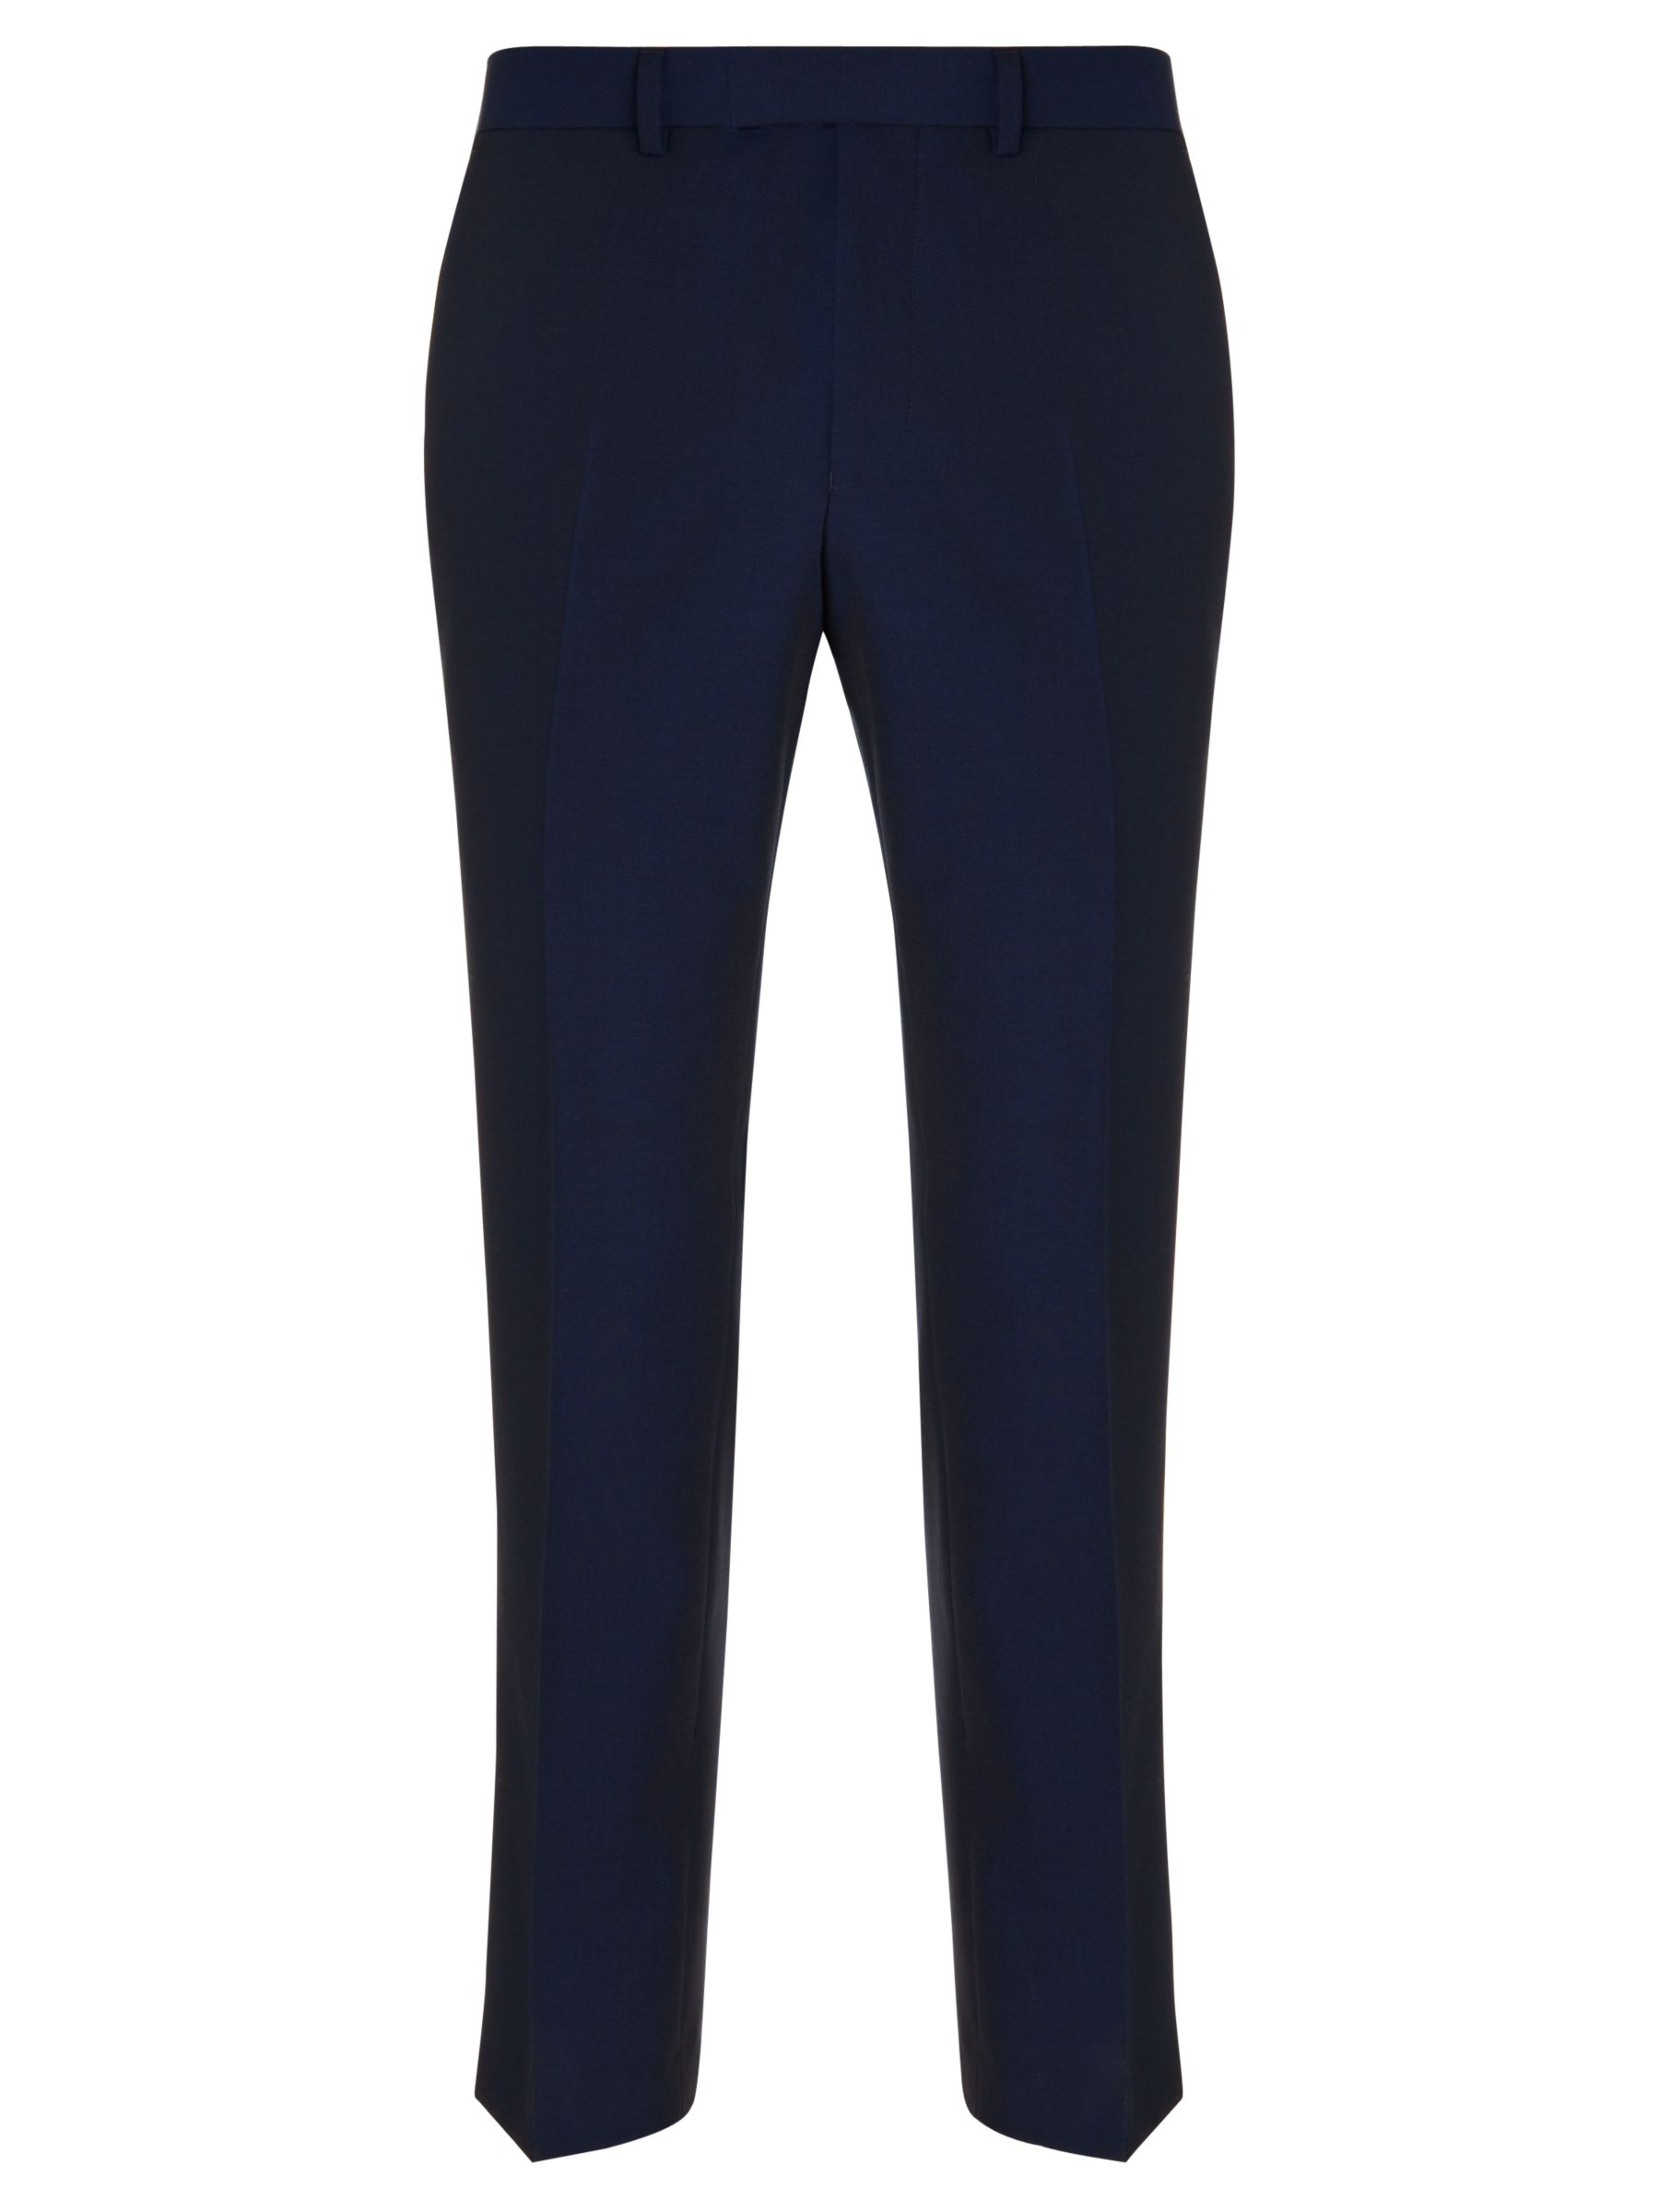 Buy Kin by John Lewis Stamford Tonic Slim Fit Suit Trousers, Midnight ...